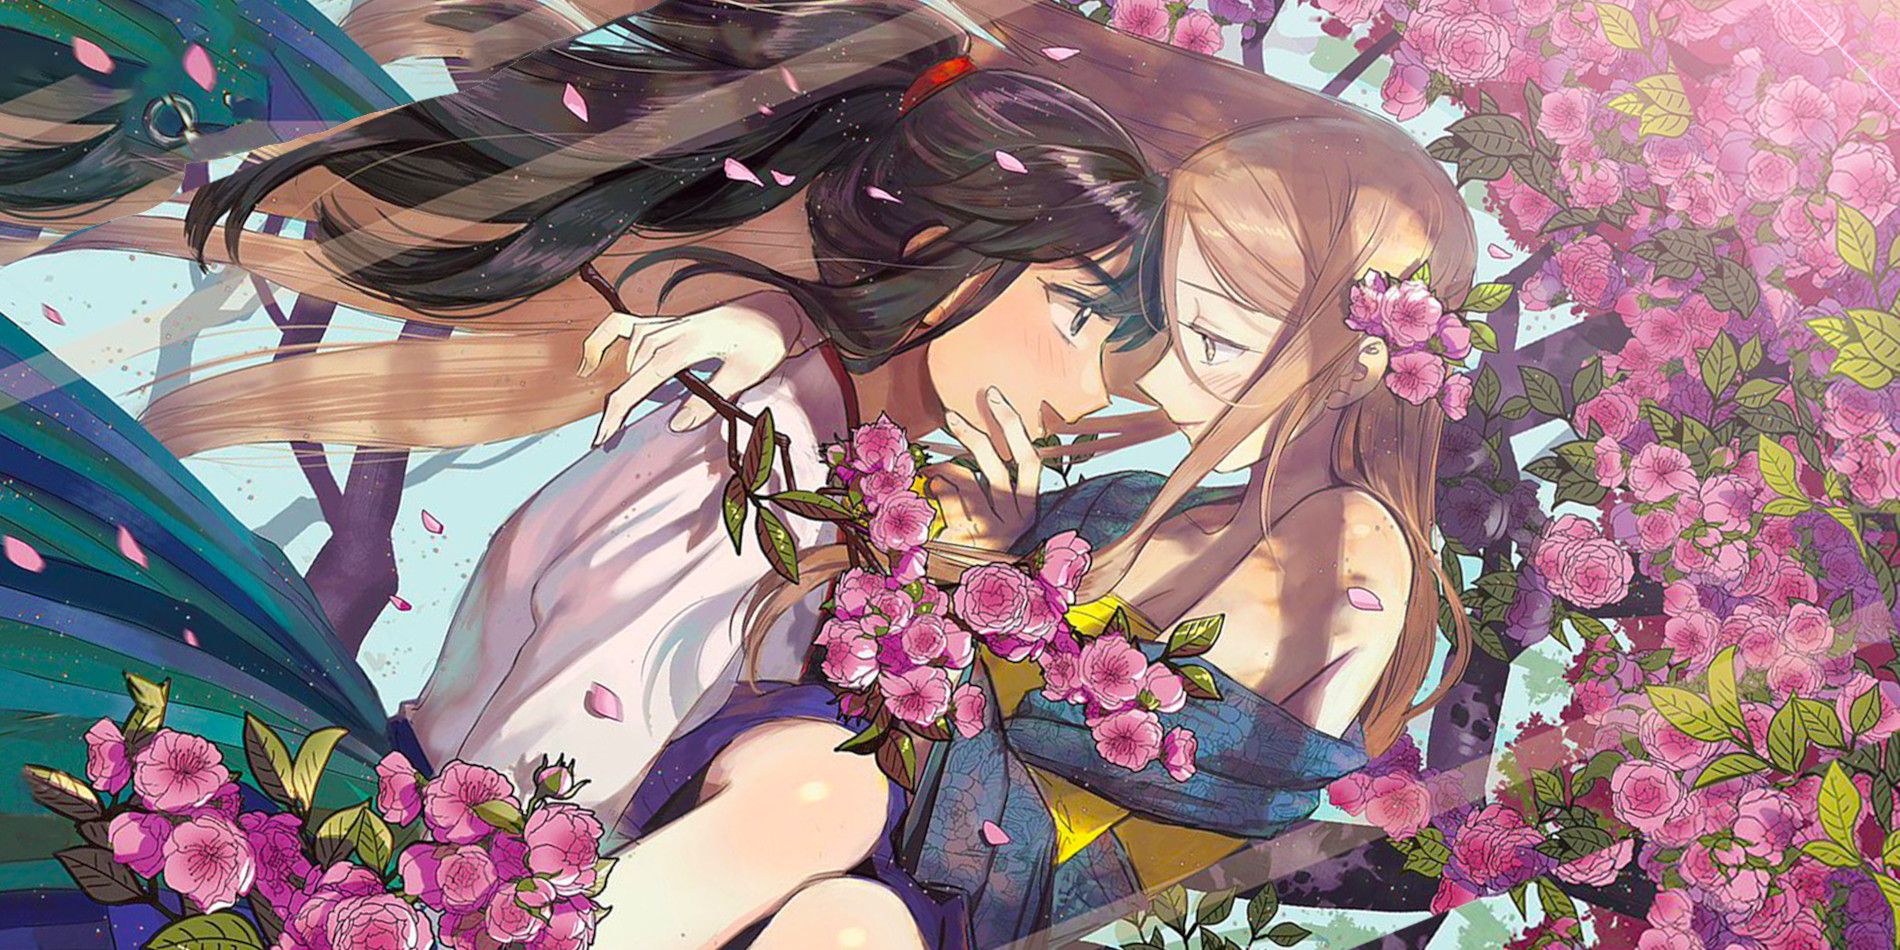 Shim Chong and Chancellor Jang embracing and about to kiss among flowers in the manwha